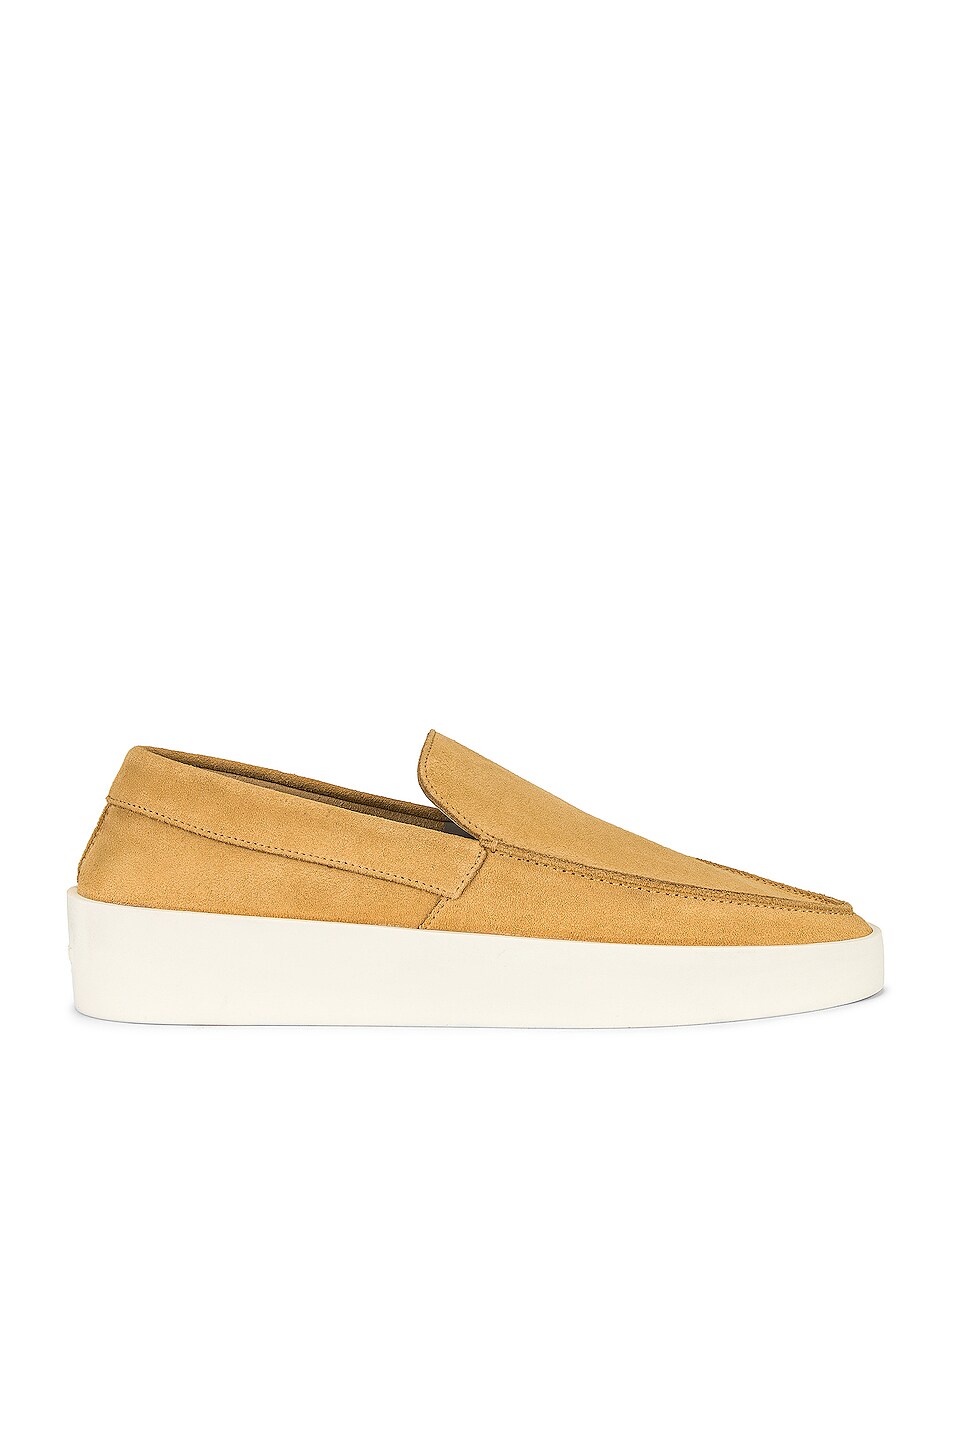 Image 1 of Fear of God The Loafer in Camel